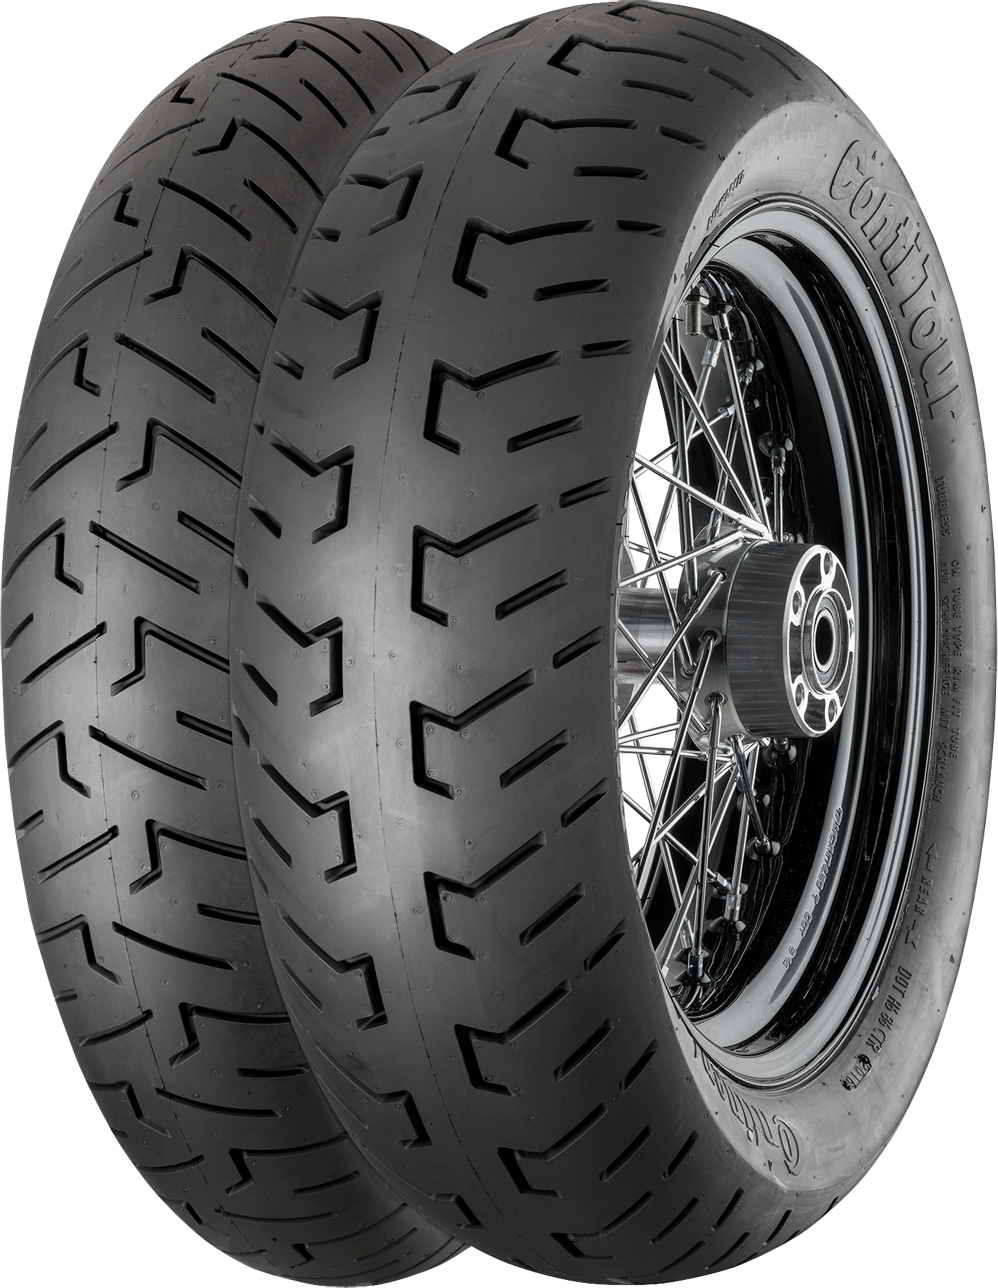 product_type-moto_tires CONTINENTAL CONTITRXL 130/90 R16 73H